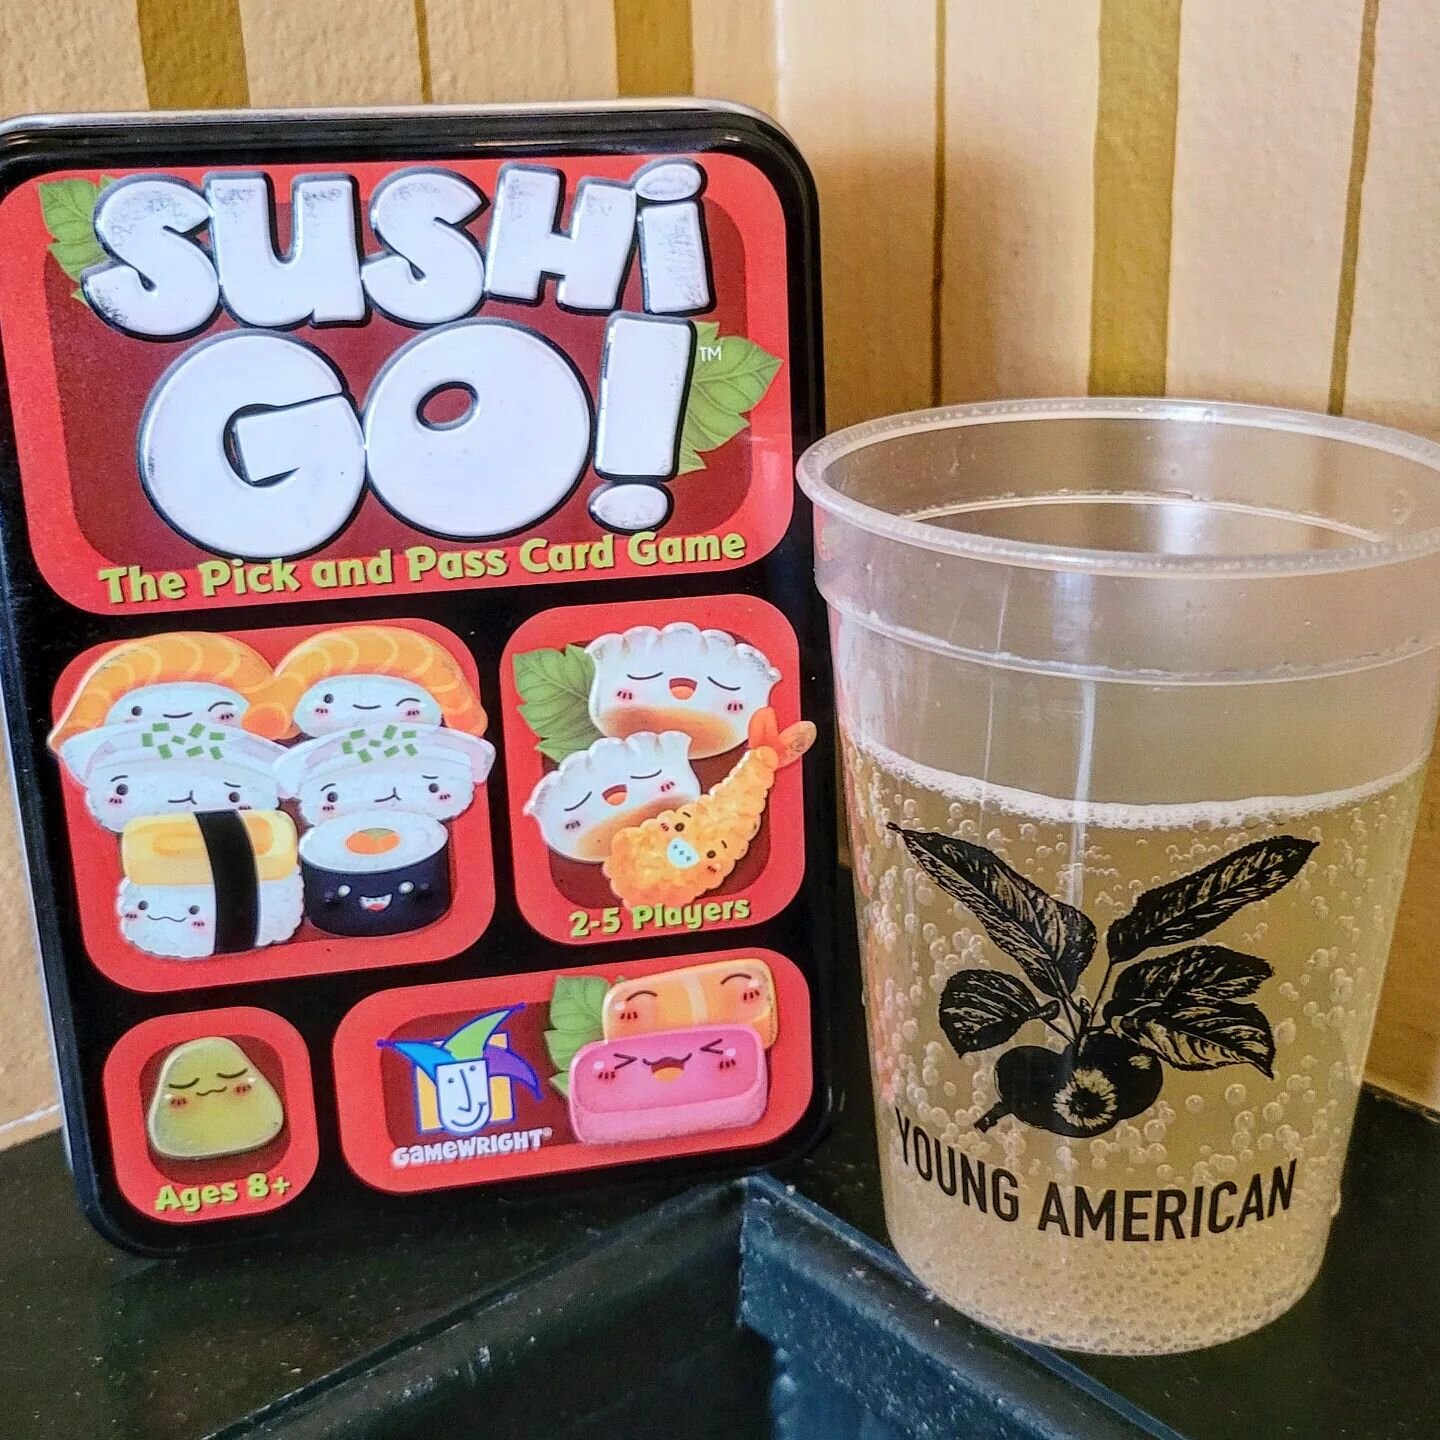 Grab your crew and check out tonight's featured game: #SushiGo - great for 2-5 players at any level! 🍣

#YoungAmericanGameNight every Wednesday.

#YoungAmericanTastingRoom #YoungAmericanEvents #YoungAmericanHardCider #UwishunuPhilly #cardgames #mult